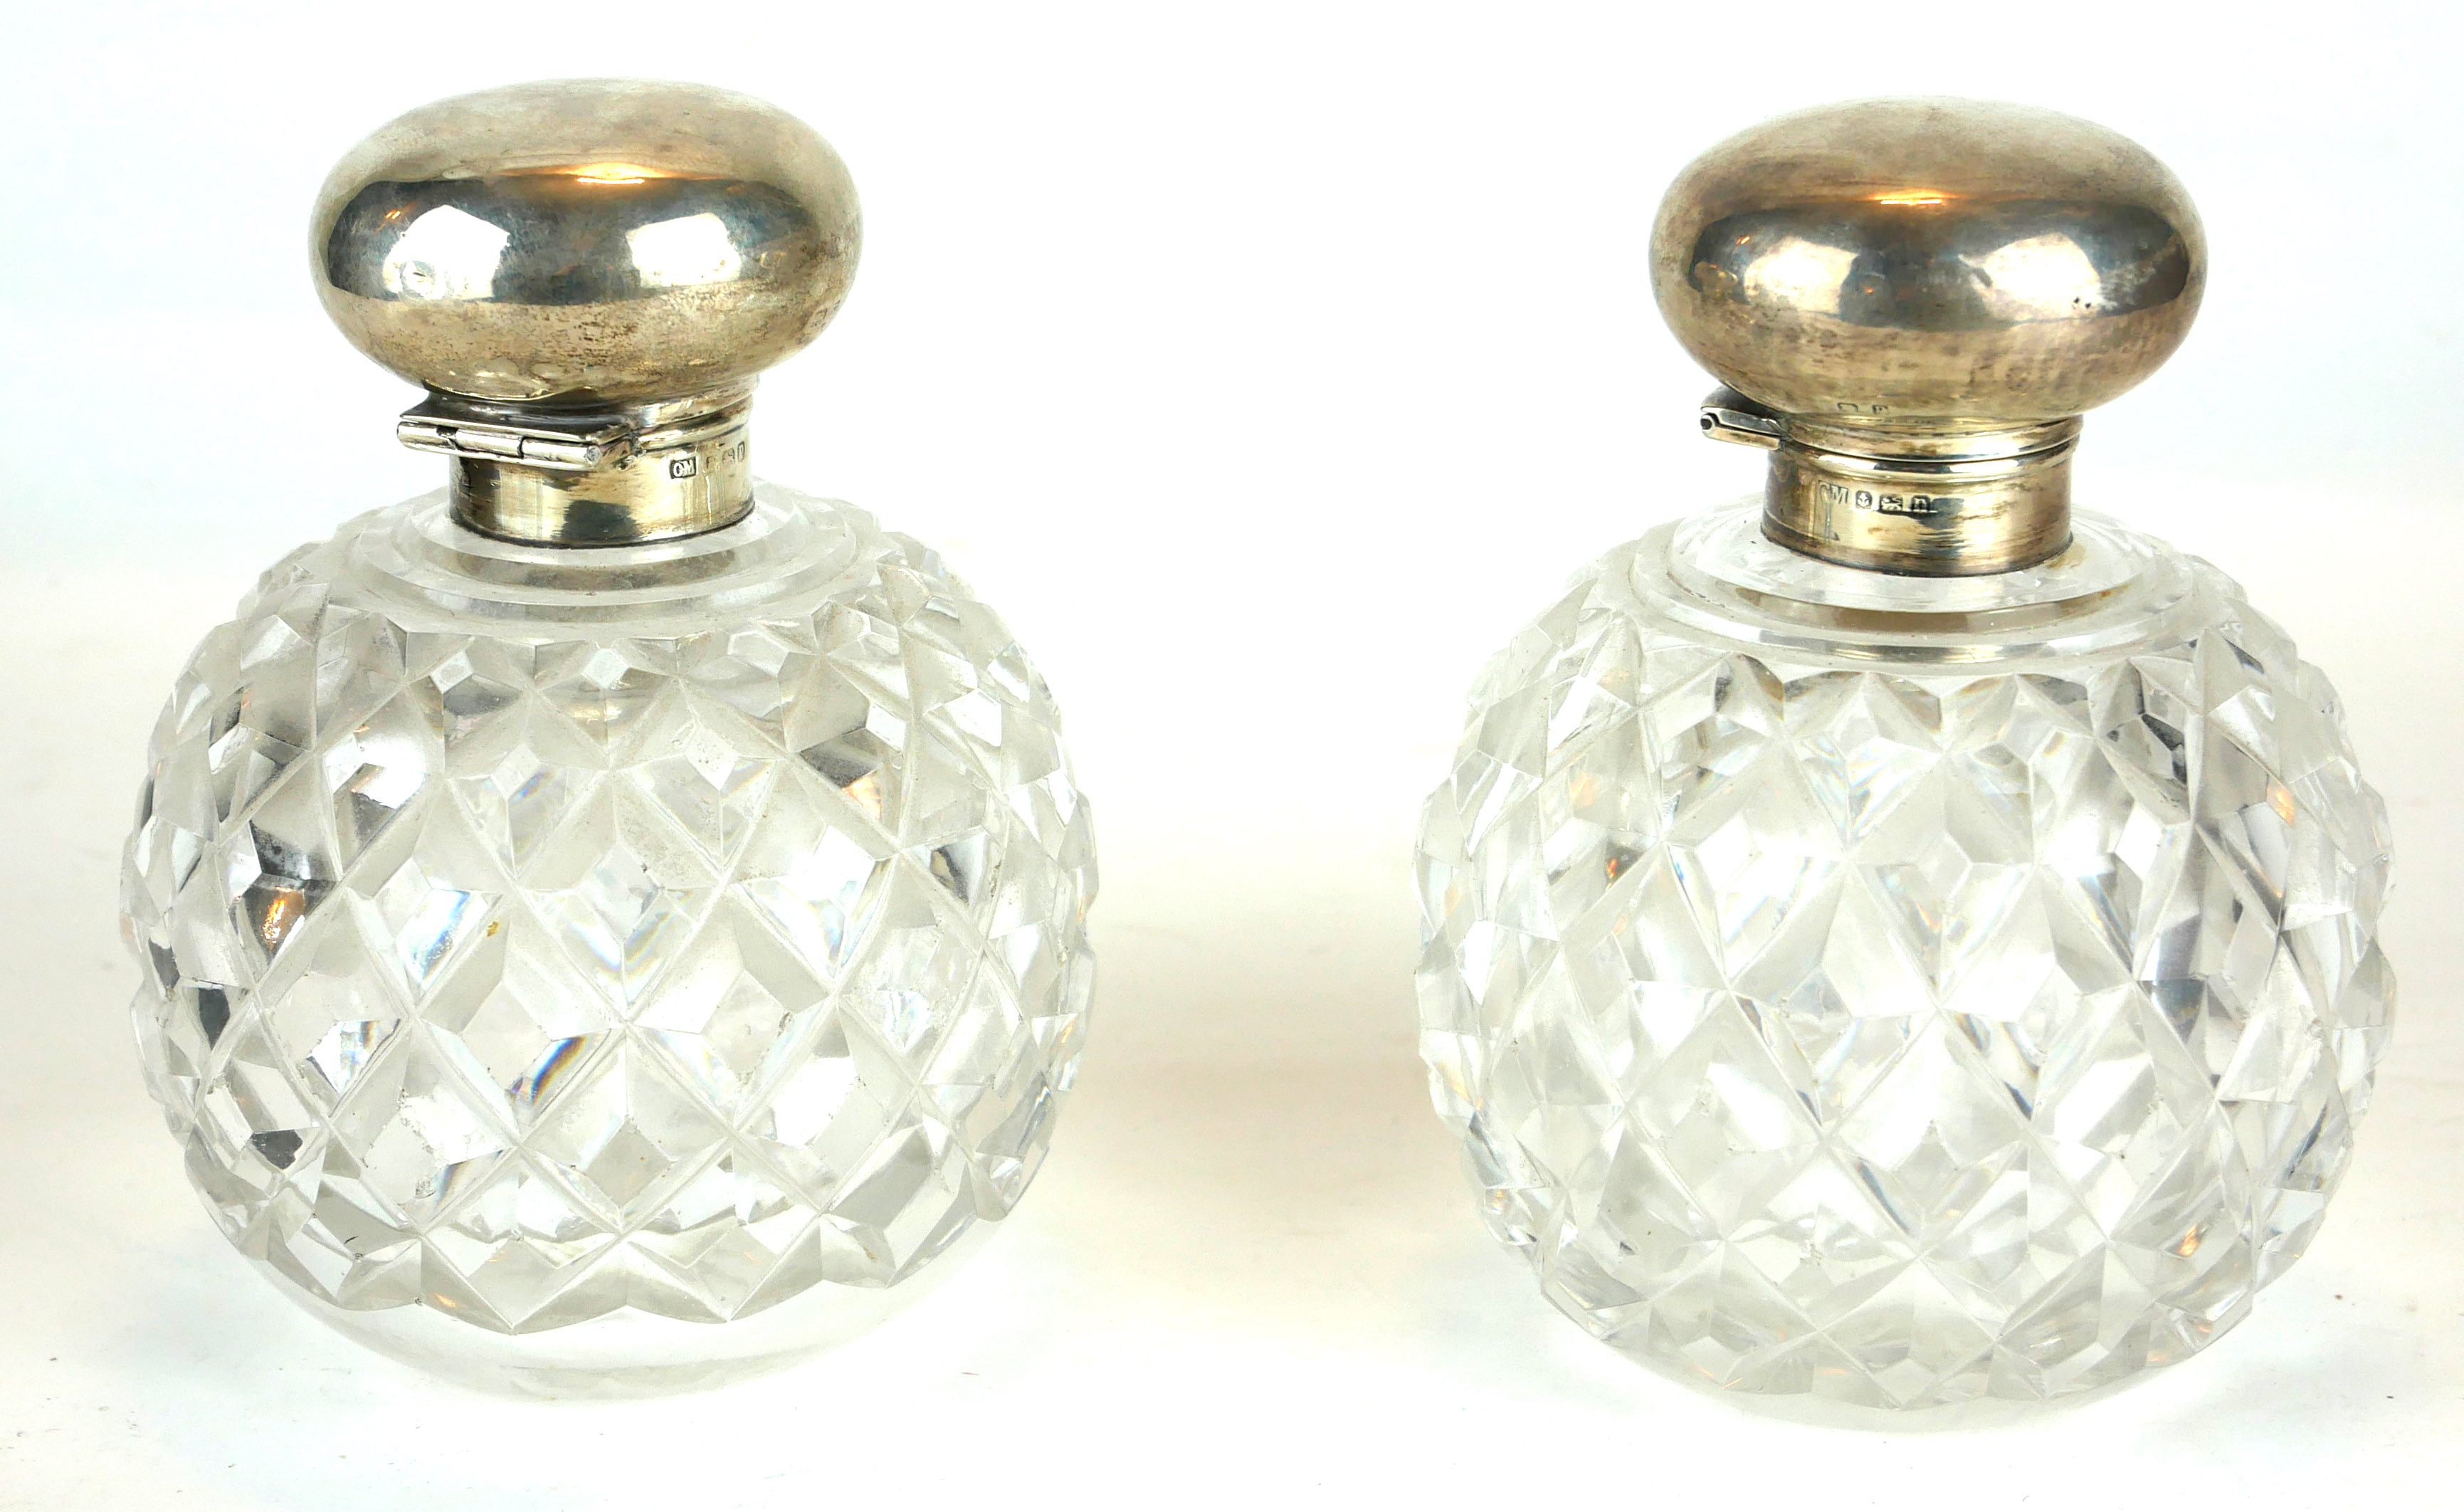 A PAIR OF EDWARDIAN SILVER AND HOBNAIL CUT GLASS PERFUME BOTTLES Spherical hinged lids, hallmarked